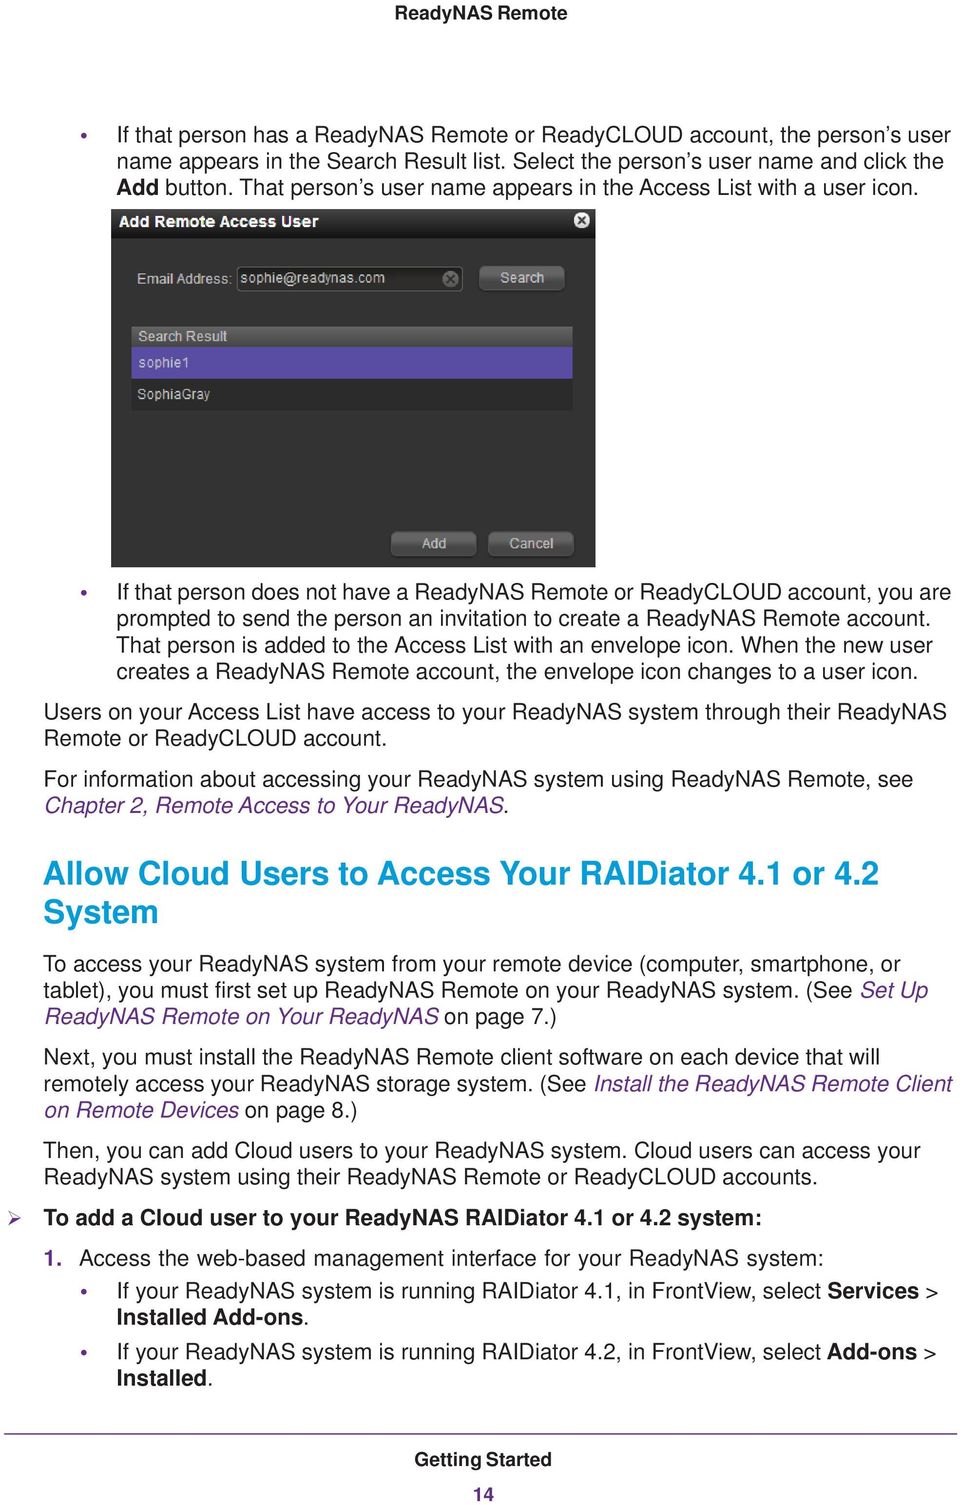 If that person does not have a ReadyNAS Remote or ReadyCLOUD account, you are prompted to send the person an invitation to create a ReadyNAS Remote account.